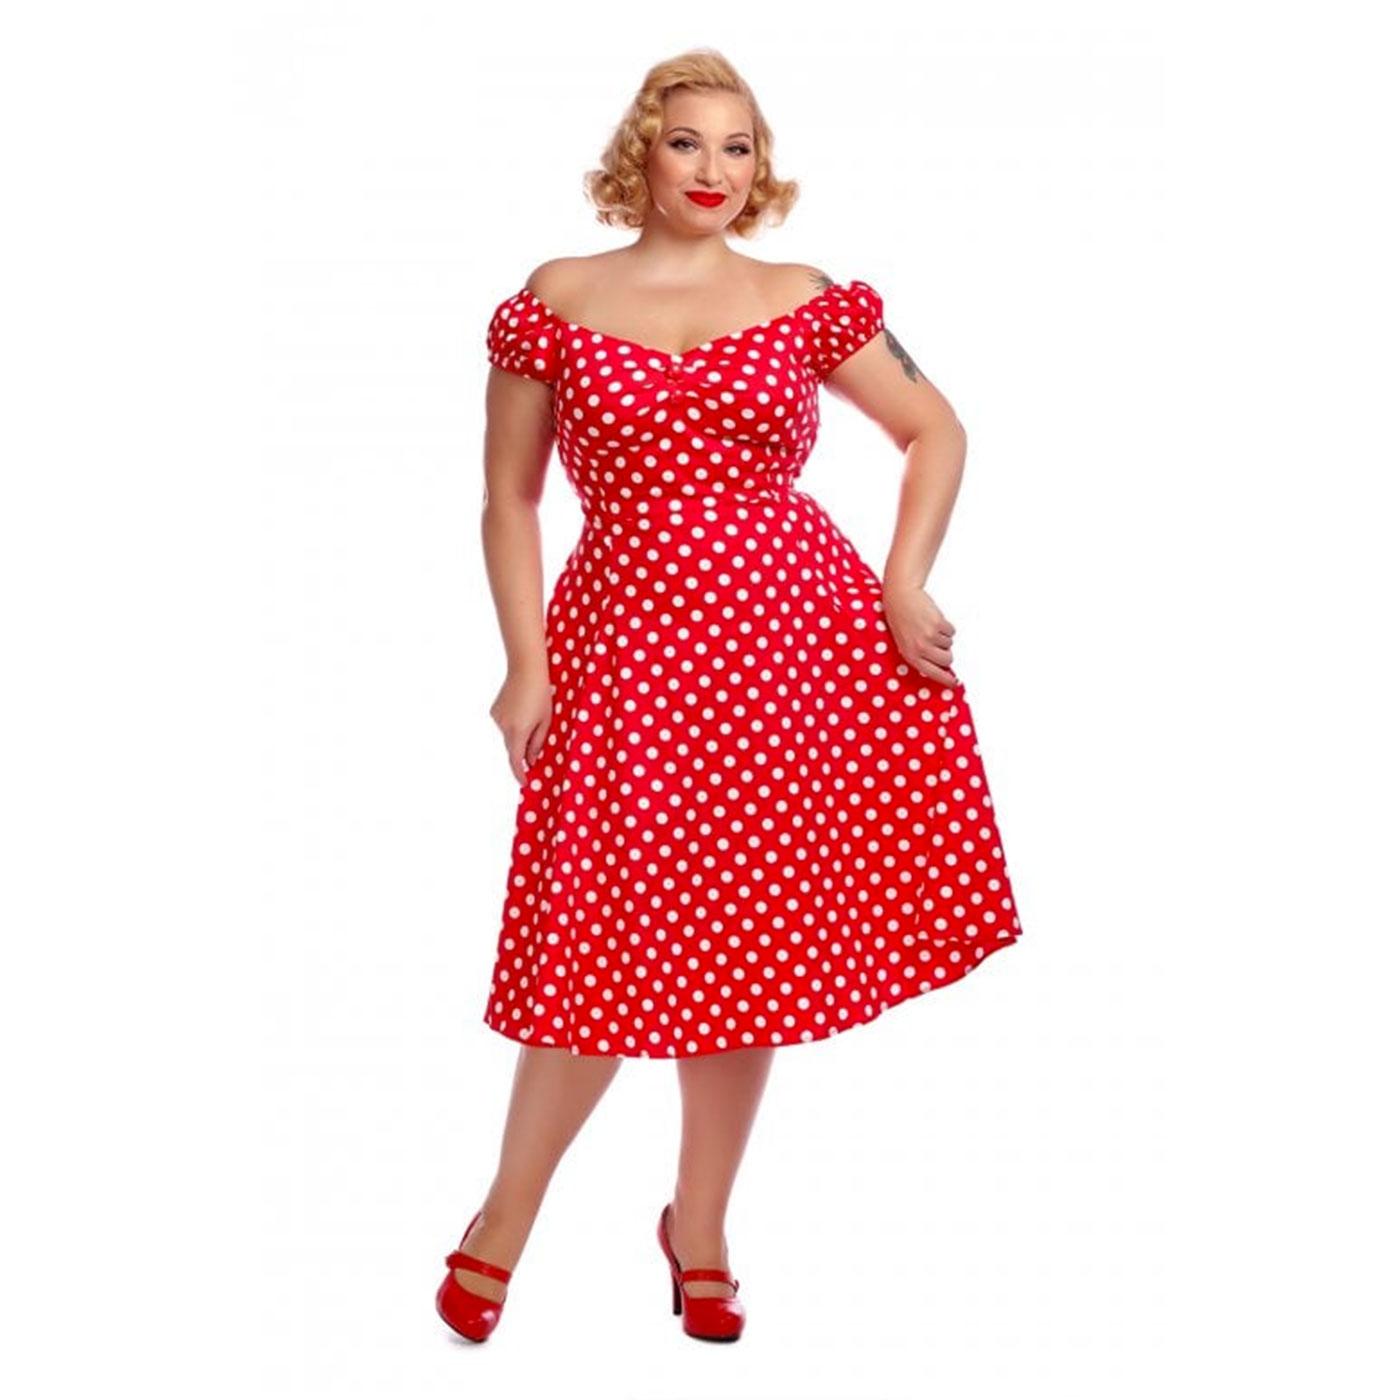 COLLECTIF Dolores Retro Vintage Doll Dress in Red Polka Dot